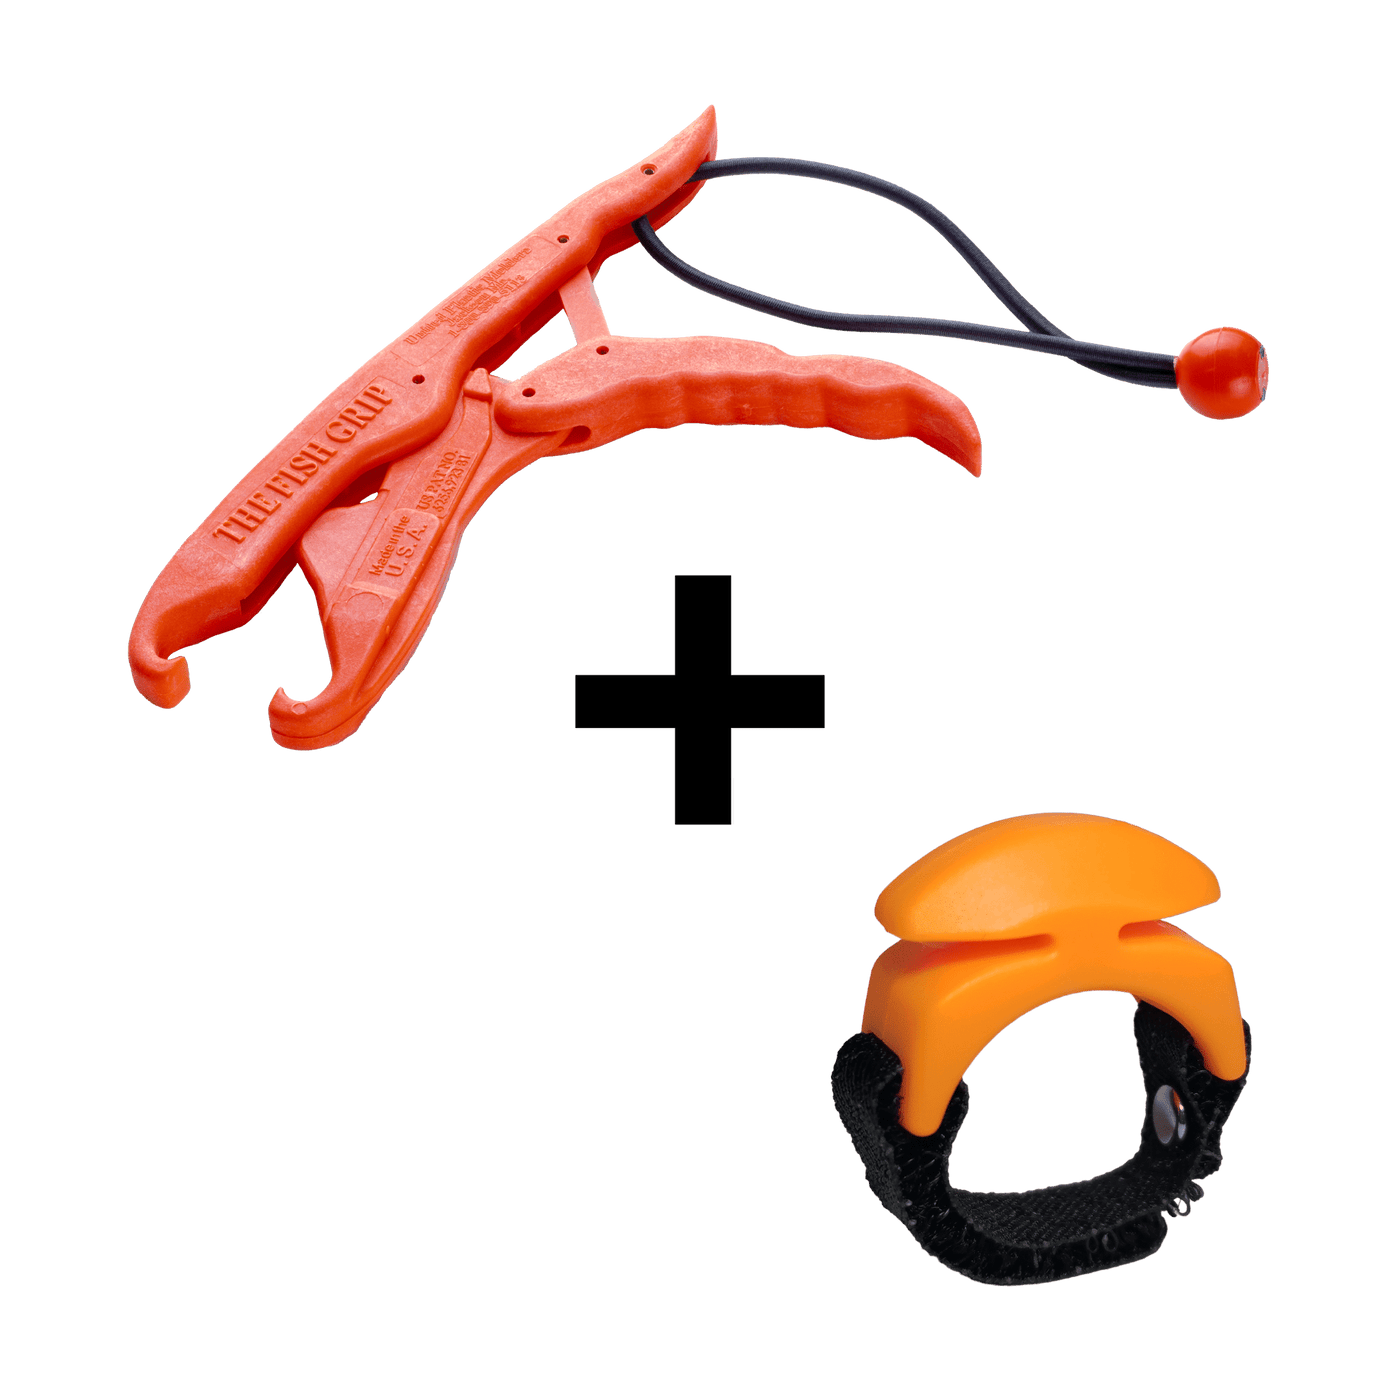 COMBO DEAL - Line Cutterz Ceramic Blade Ring + Lunker Tamers by The Fi